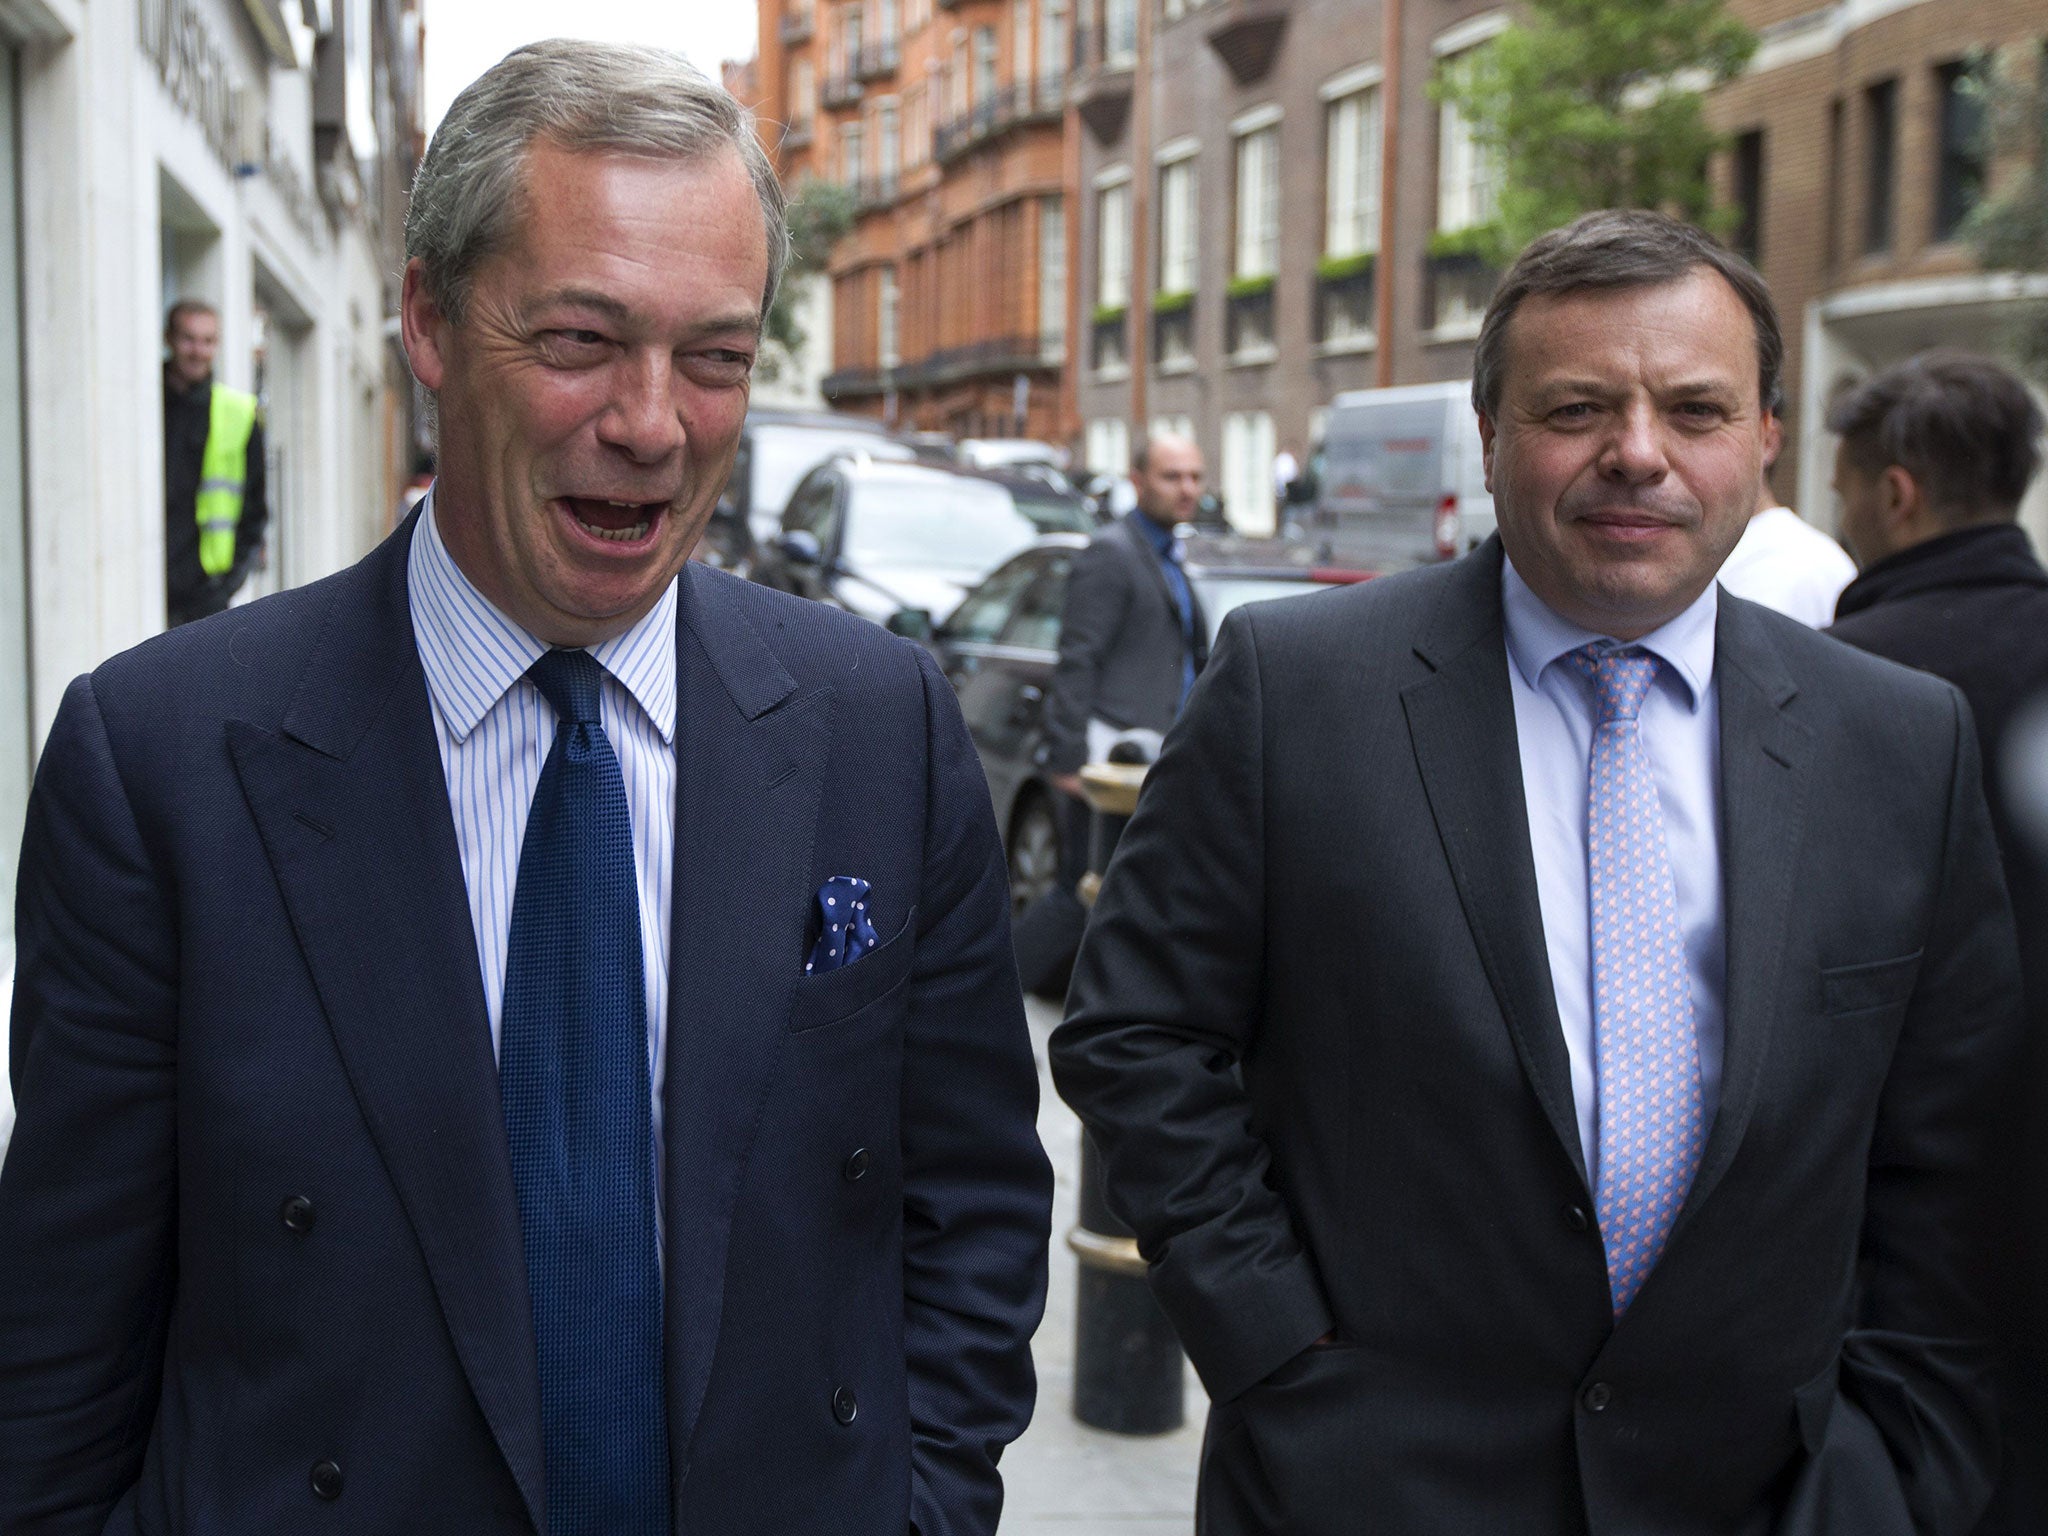 UK Independence Party (UKIP) leader Nigel Farage (L) and major donor Arron Banks leave the party's head office in central London on 15 May 2015.